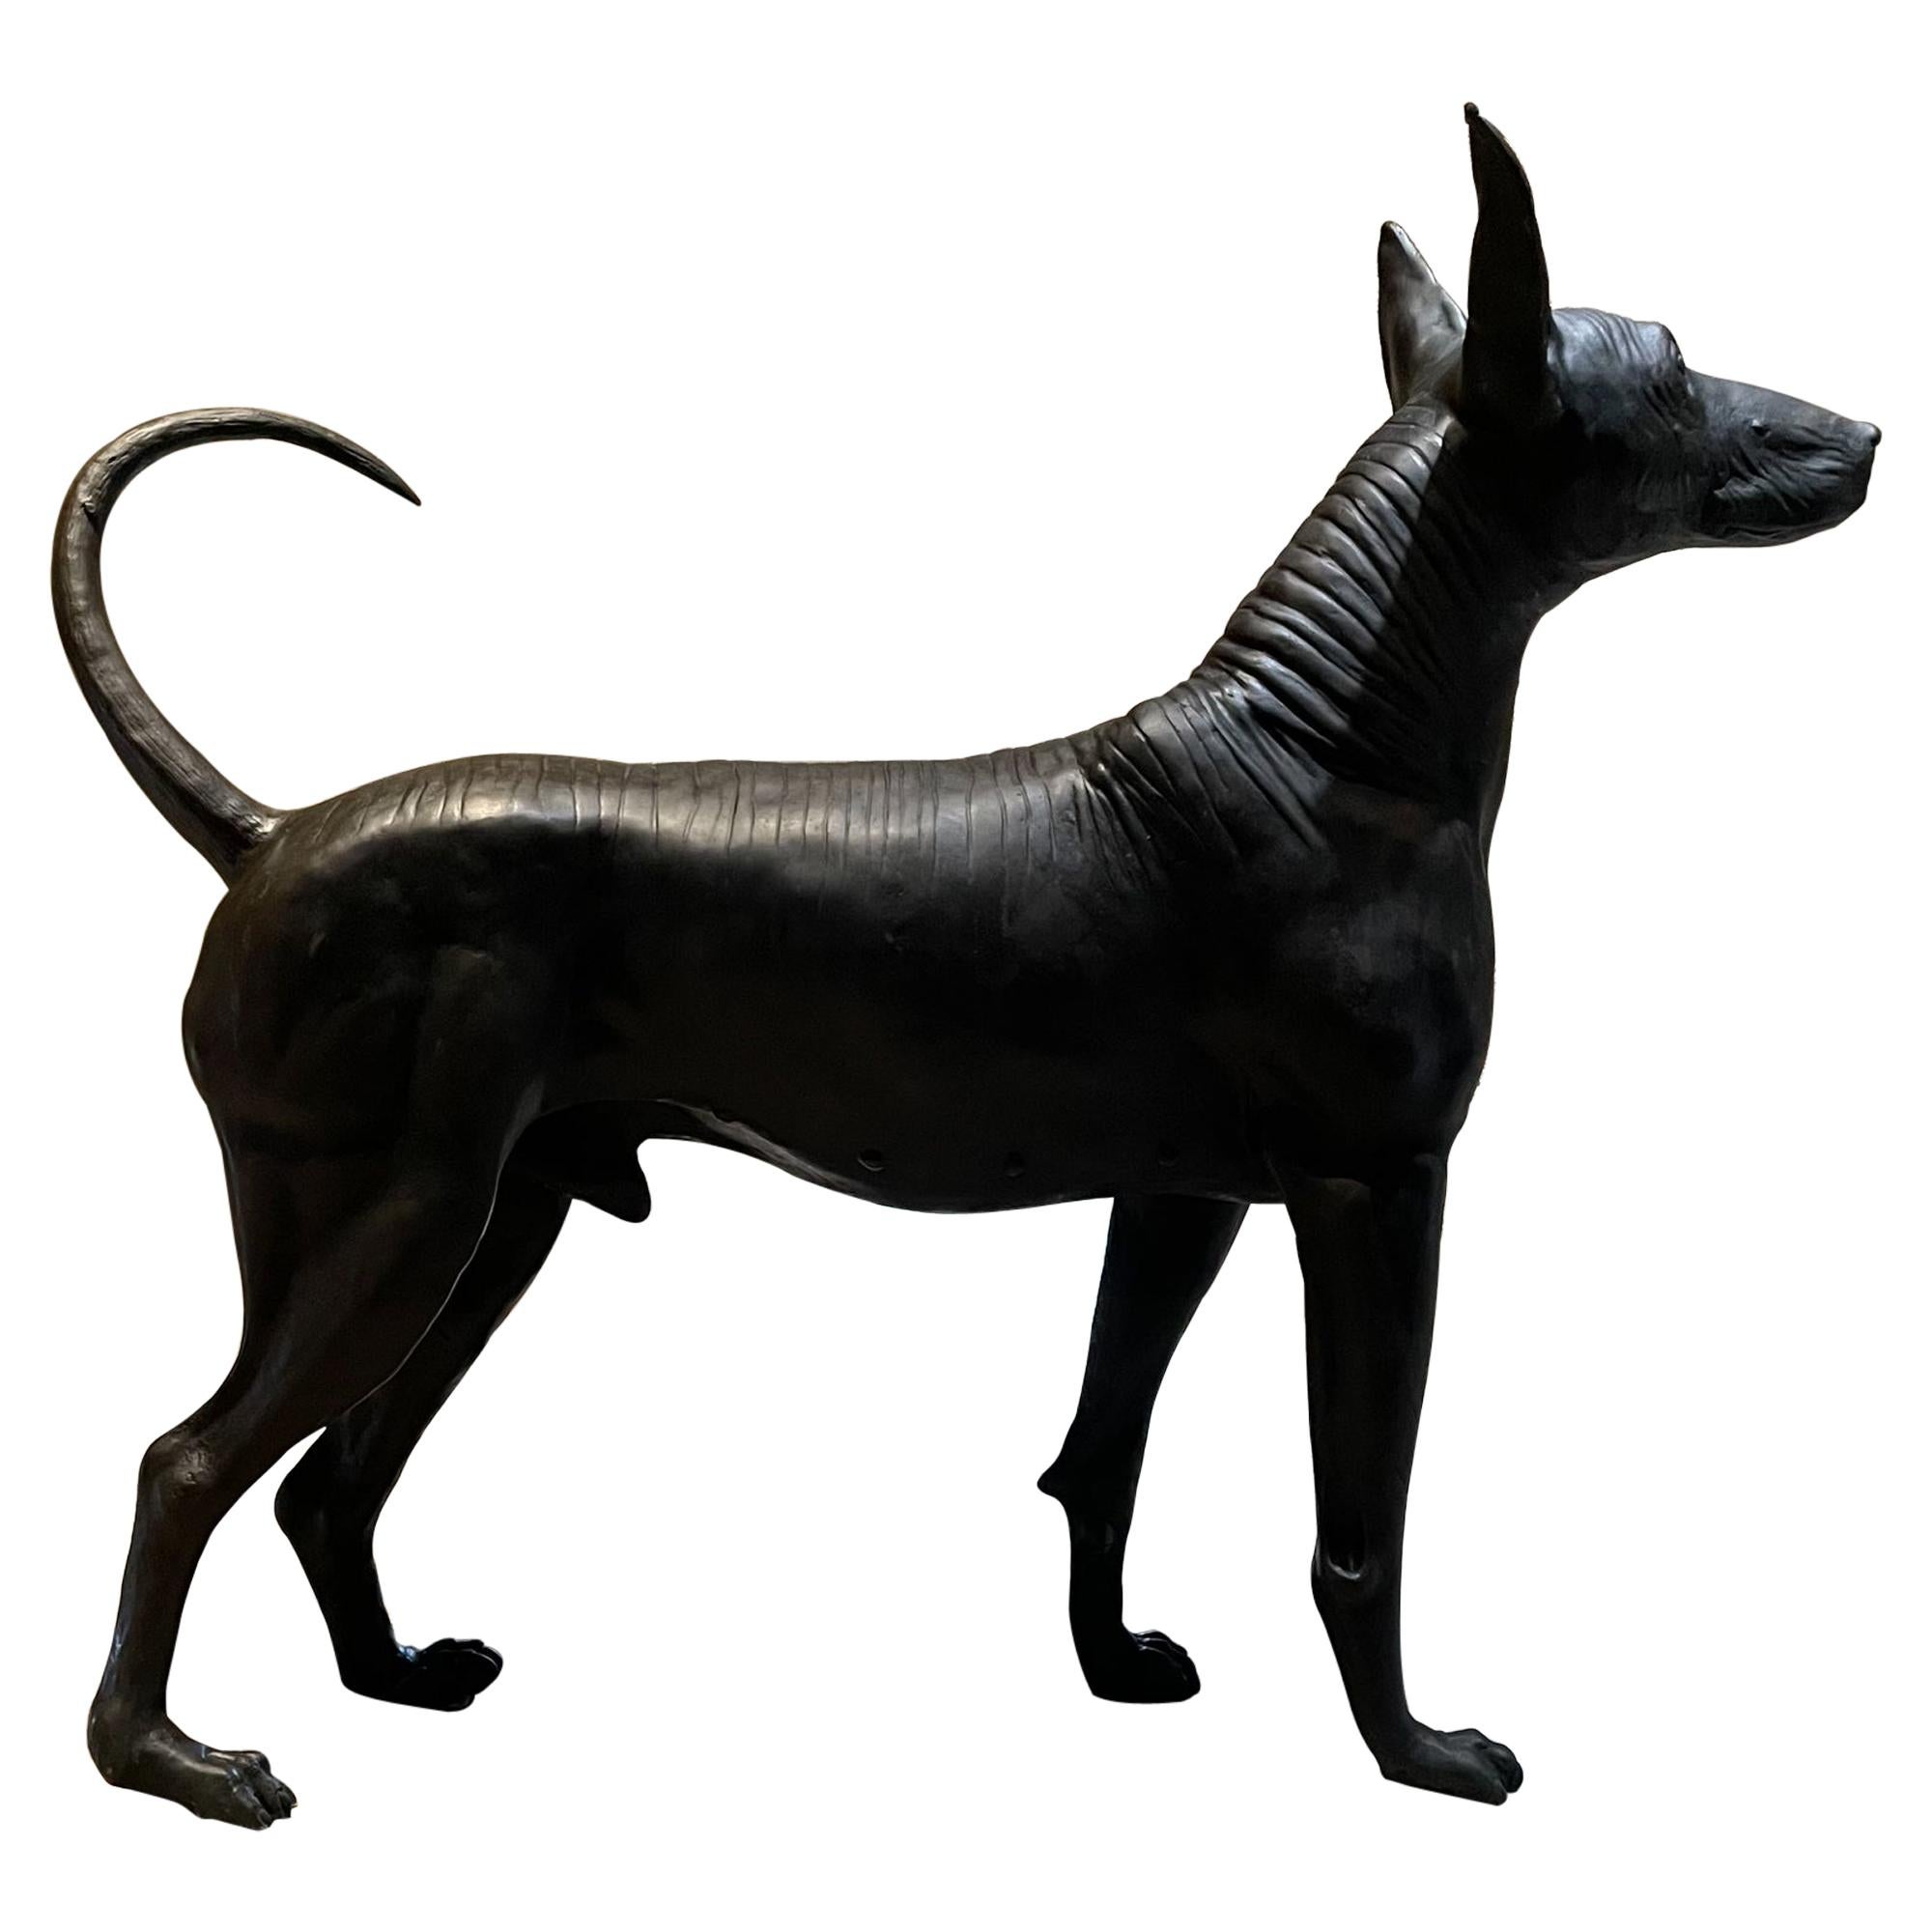 AMBIANIC presents
Beyond amazing lifelike Sculpture Mexican Hairless Dog Xoloitzcuintli Xolo in Cast Bronze.
Simply brilliant Xoloitzcuintle sculpture by Mexican sculptor Guillermo Castaño, internationally known sculptor acknowledged master of the